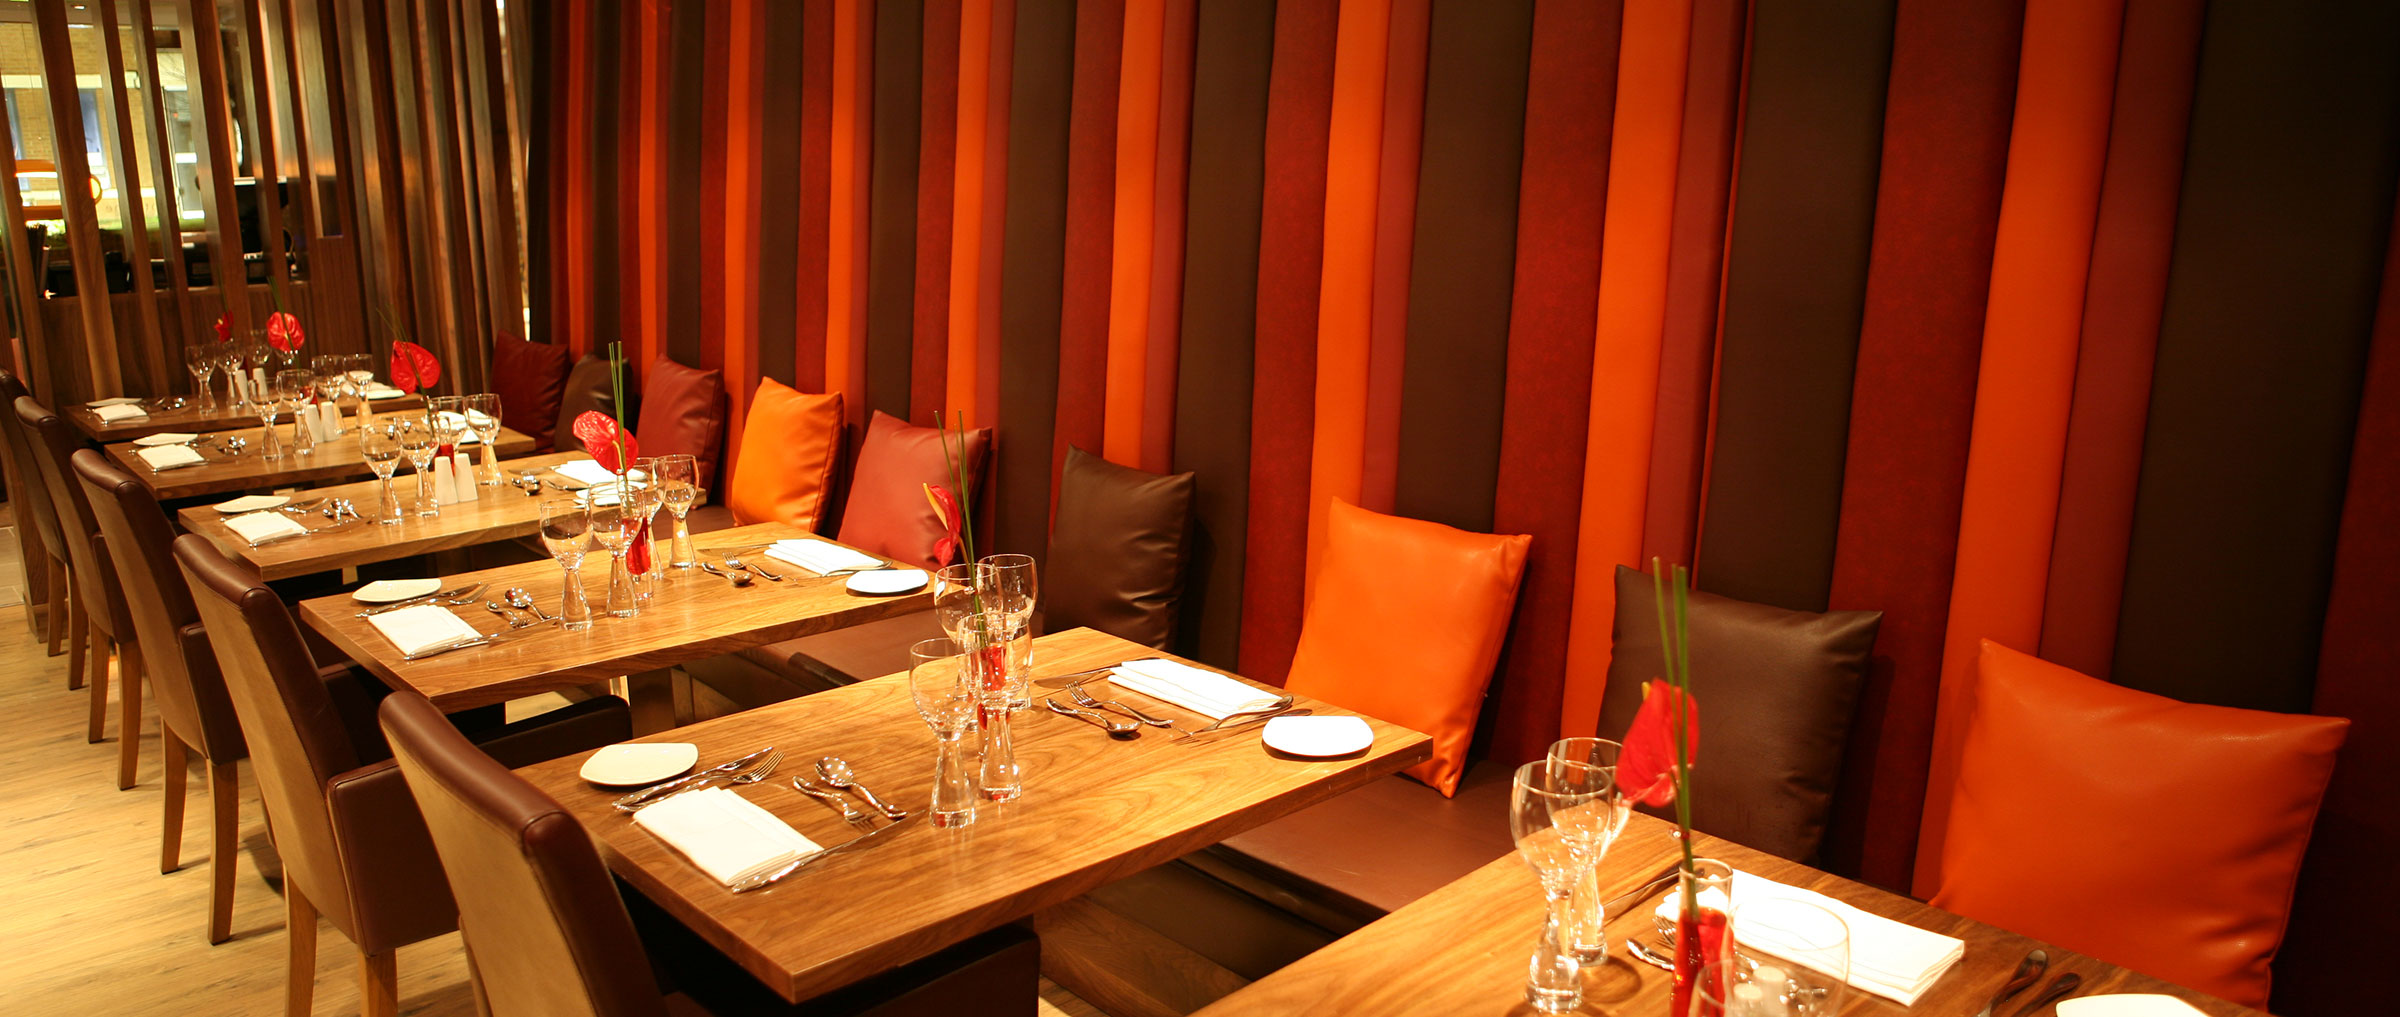 restaurant table and chairs with red interior design